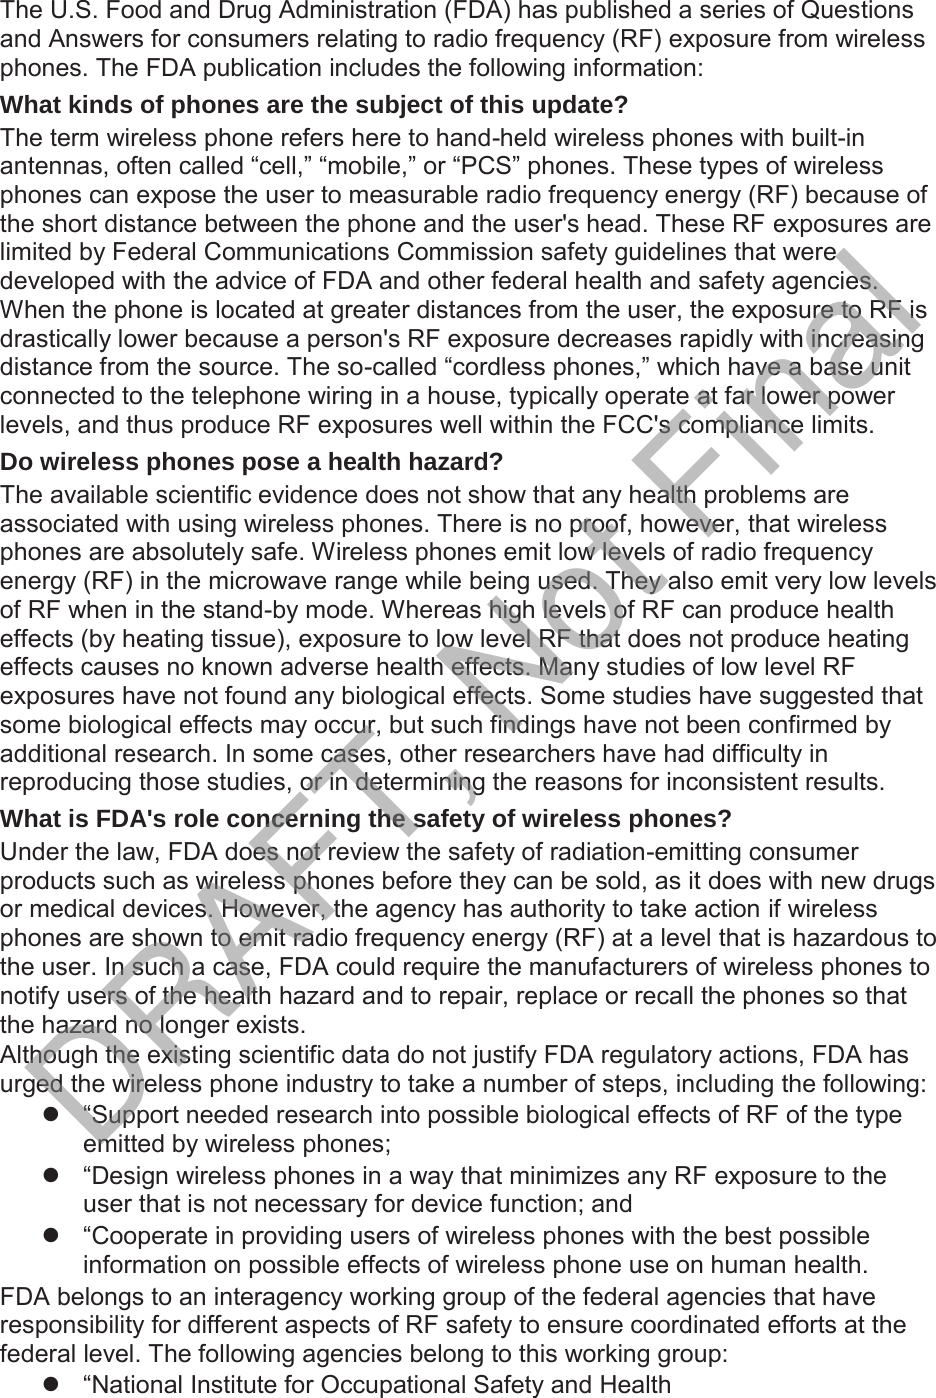 The U.S. Food and Drug Administration (FDA) has published a series of Questions and Answers for consumers relating to radio frequency (RF) exposure from wireless phones. The FDA publication includes the following information:What kinds of phones are the subject of this update? The term wireless phone refers here to hand-held wireless phones with built-in antennas, often called “cell,” “mobile,” or “PCS” phones. These types of wireless phones can expose the user to measurable radio frequency energy (RF) because of the short distance between the phone and the user&apos;s head. These RF exposures are limited by Federal Communications Commission safety guidelines that were developed with the advice of FDA and other federal health and safety agencies. When the phone is located at greater distances from the user, the exposure to RF is drastically lower because a person&apos;s RF exposure decreases rapidly with increasing distance from the source. The so-called “cordless phones,” which have a base unit connected to the telephone wiring in a house, typically operate at far lower power levels, and thus produce RF exposures well within the FCC&apos;s compliance limits.Do wireless phones pose a health hazard? The available scientific evidence does not show that any health problems are associated with using wireless phones. There is no proof, however, that wireless phones are absolutely safe. Wireless phones emit low levels of radio frequency energy (RF) in the microwave range while being used. They also emit very low levels of RF when in the stand-by mode. Whereas high levels of RF can produce health effects (by heating tissue), exposure to low level RF that does not produce heating effects causes no known adverse health effects. Many studies of low level RF exposures have not found any biological effects. Some studies have suggested that some biological effects may occur, but such findings have not been confirmed by additional research. In some cases, other researchers have had difficulty in reproducing those studies, or in determining the reasons for inconsistent results.What is FDA&apos;s role concerning the safety of wireless phones? Under the law, FDA does not review the safety of radiation-emitting consumer products such as wireless phones before they can be sold, as it does with new drugs or medical devices. However, the agency has authority to take action if wireless phones are shown to emit radio frequency energy (RF) at a level that is hazardous to the user. In such a case, FDA could require the manufacturers of wireless phones to notify users of the health hazard and to repair, replace or recall the phones so that the hazard no longer exists.Although the existing scientific data do not justify FDA regulatory actions, FDA has urged the wireless phone industry to take a number of steps, including the following:z  “Support needed research into possible biological effects of RF of the type emitted by wireless phones;z  “Design wireless phones in a way that minimizes any RF exposure to the user that is not necessary for device function; andz  “Cooperate in providing users of wireless phones with the best possible information on possible effects of wireless phone use on human health.FDA belongs to an interagency working group of the federal agencies that have responsibility for different aspects of RF safety to ensure coordinated efforts at the federal level. The following agencies belong to this working group:z  “National Institute for Occupational Safety and HealthDRAFT, Not Final